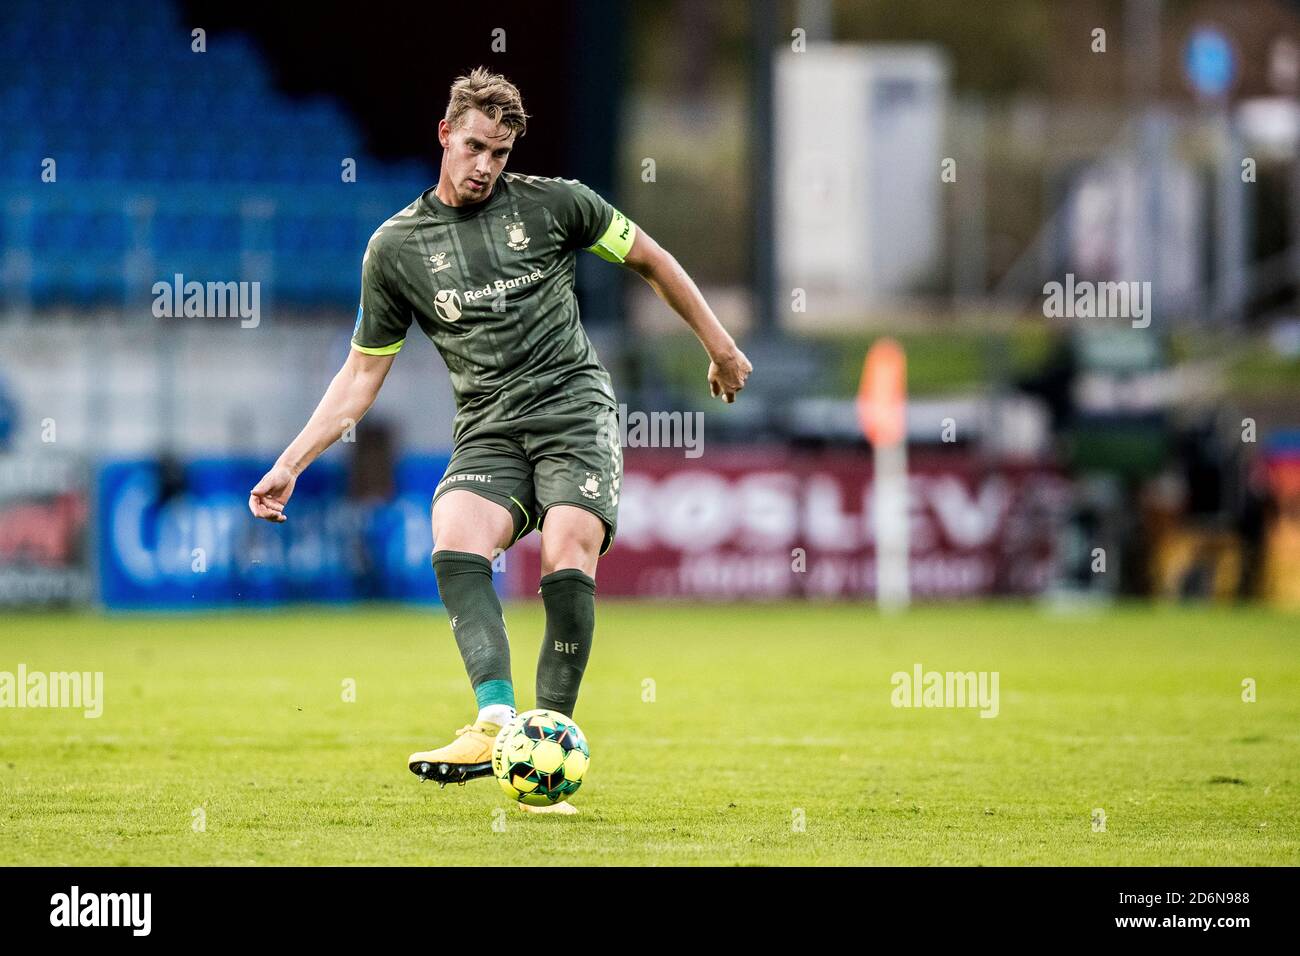 Haderslev, Denmark. 18th 2020. Andreas Maxso (5) of Broendby IF seen during the 3F Superliga match between Sonderjyske and Brondby IF at Sydbank Park in Haderslev. (Photo Credit: Gonzales Photo/Alamy Live